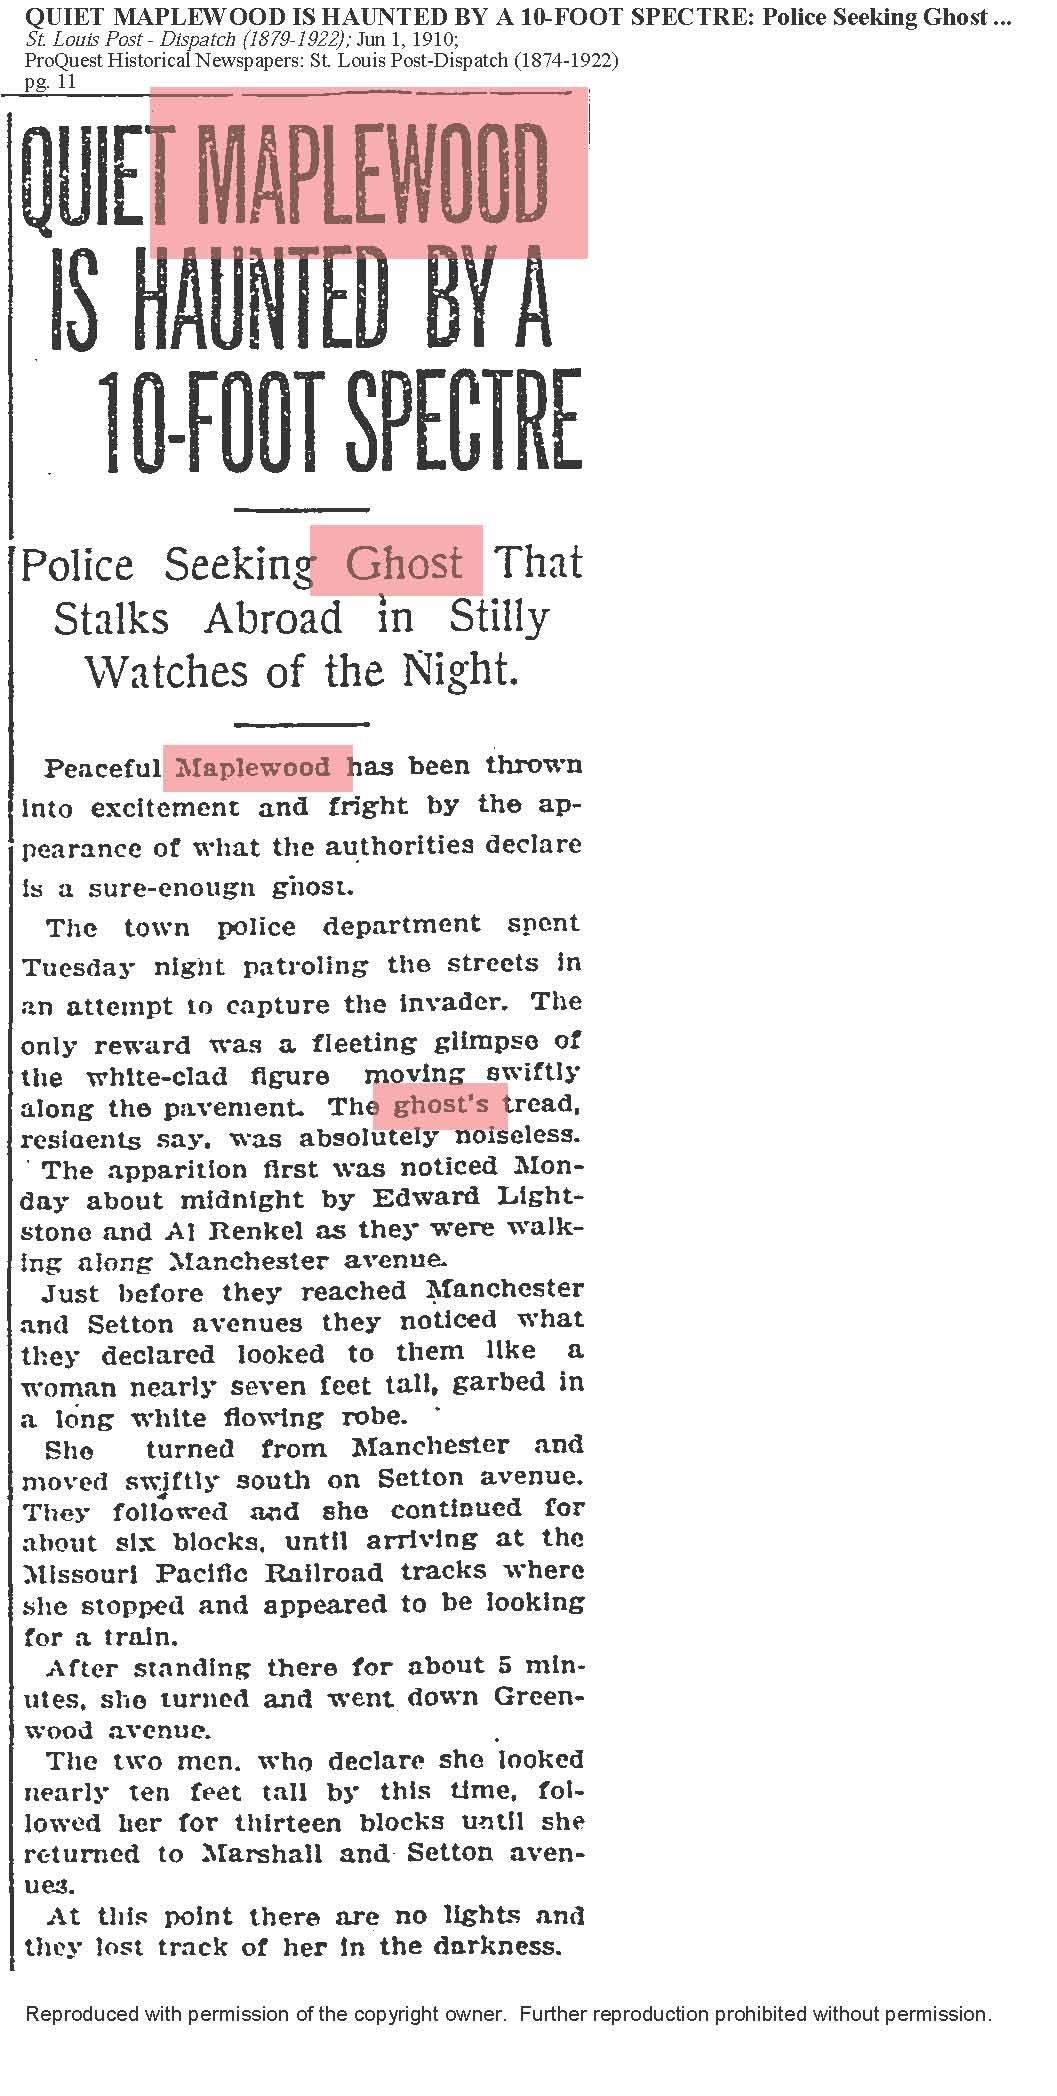 this is the original article from the St. Louis Post-Dispatch dated June 1, 1910. i think I may have posted this before but I'm posting it again so you don't have to look for it. this is just the greatest ghost story. We're very lucky to have these eyewitness accounts.